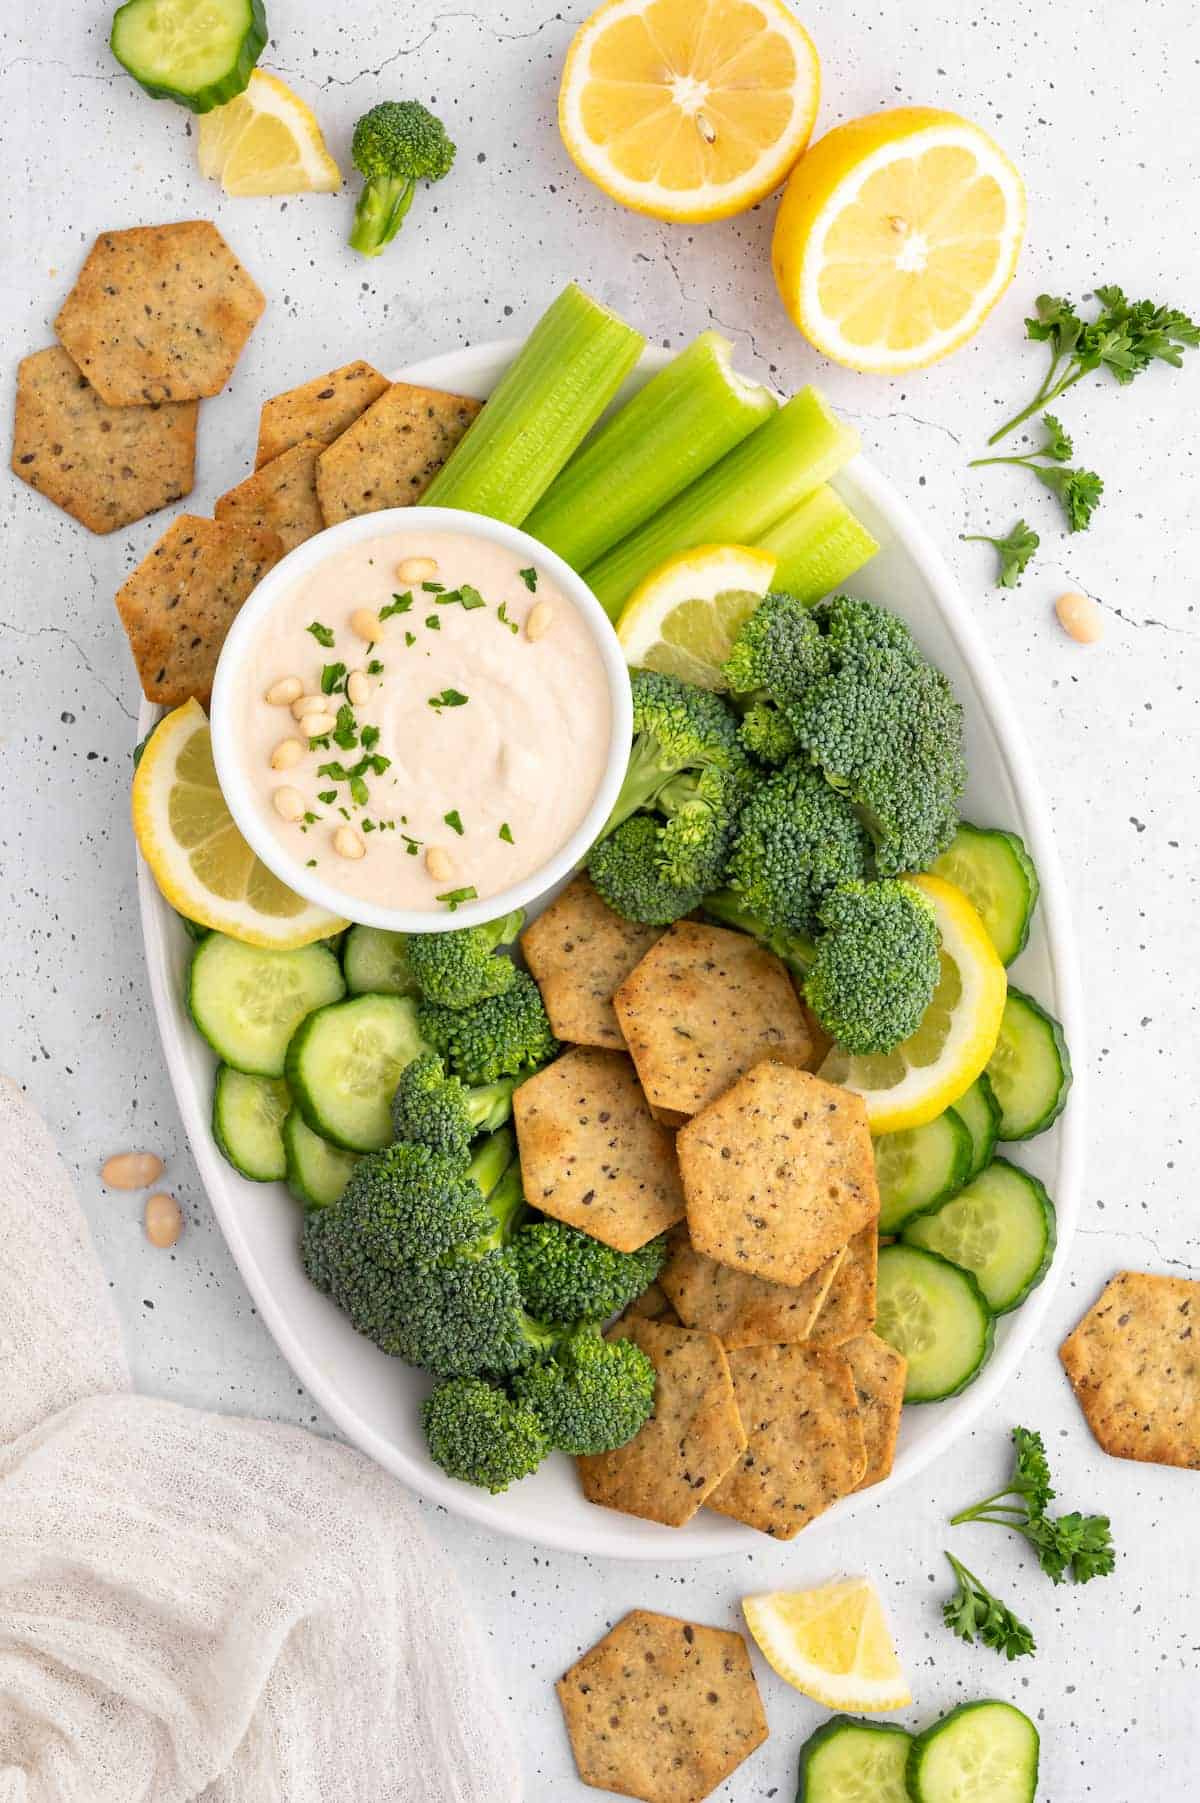 A plate of vegetables and crackers with white bean hummus.